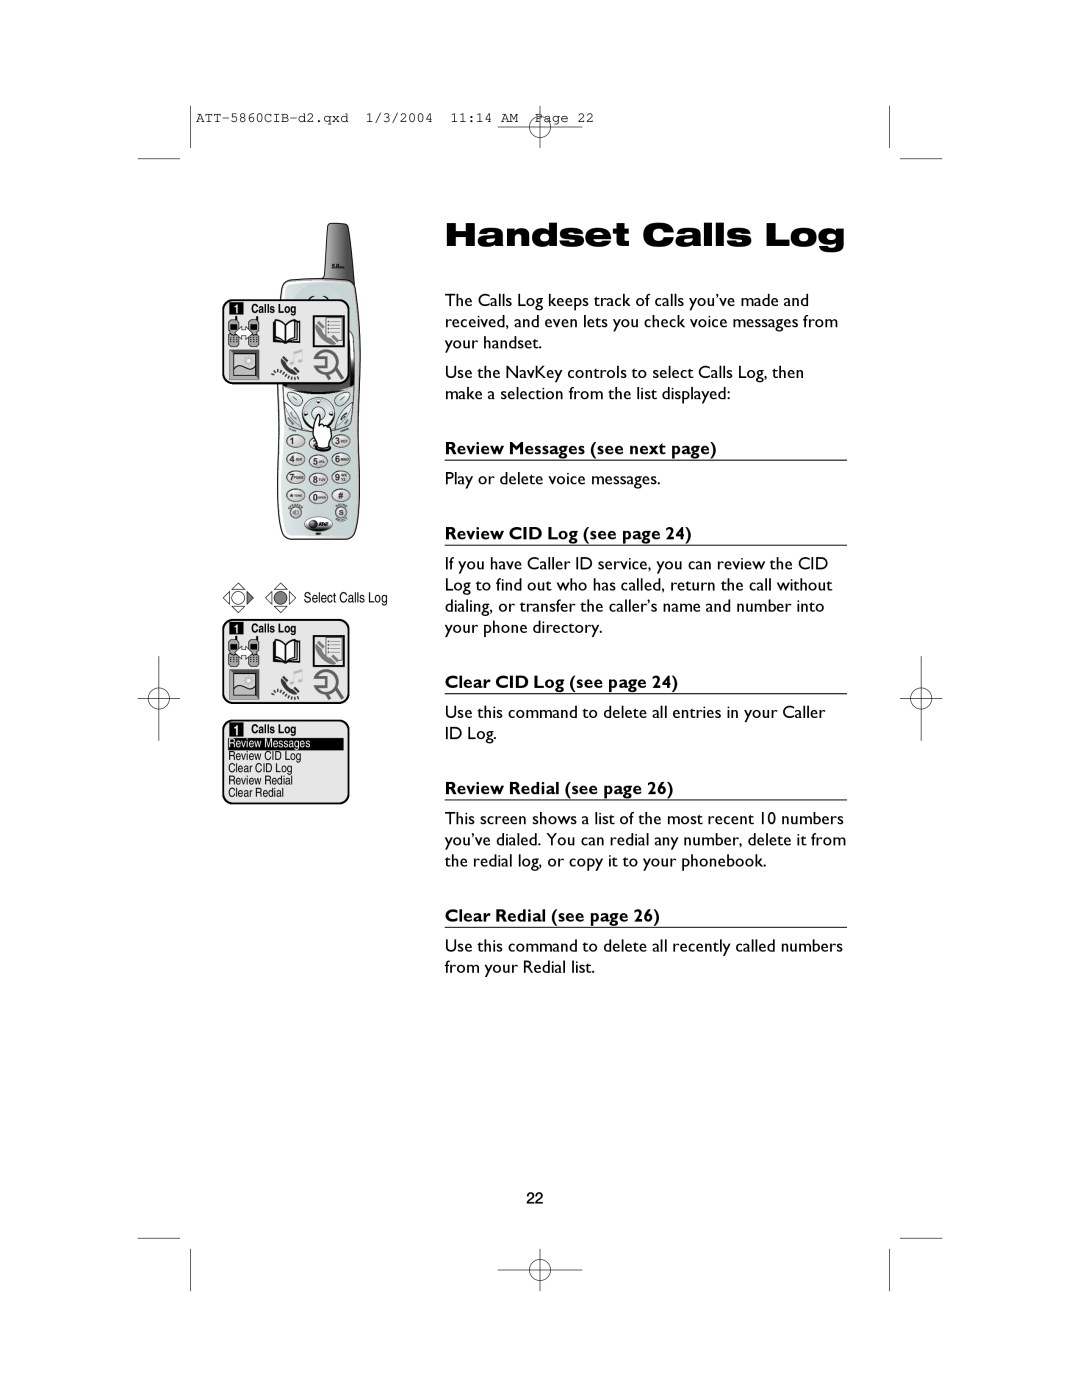 AT&T E5860 user manual Handset Calls Log, Review Messages see next page, Review CID Log see page, Clear CID Log see page 